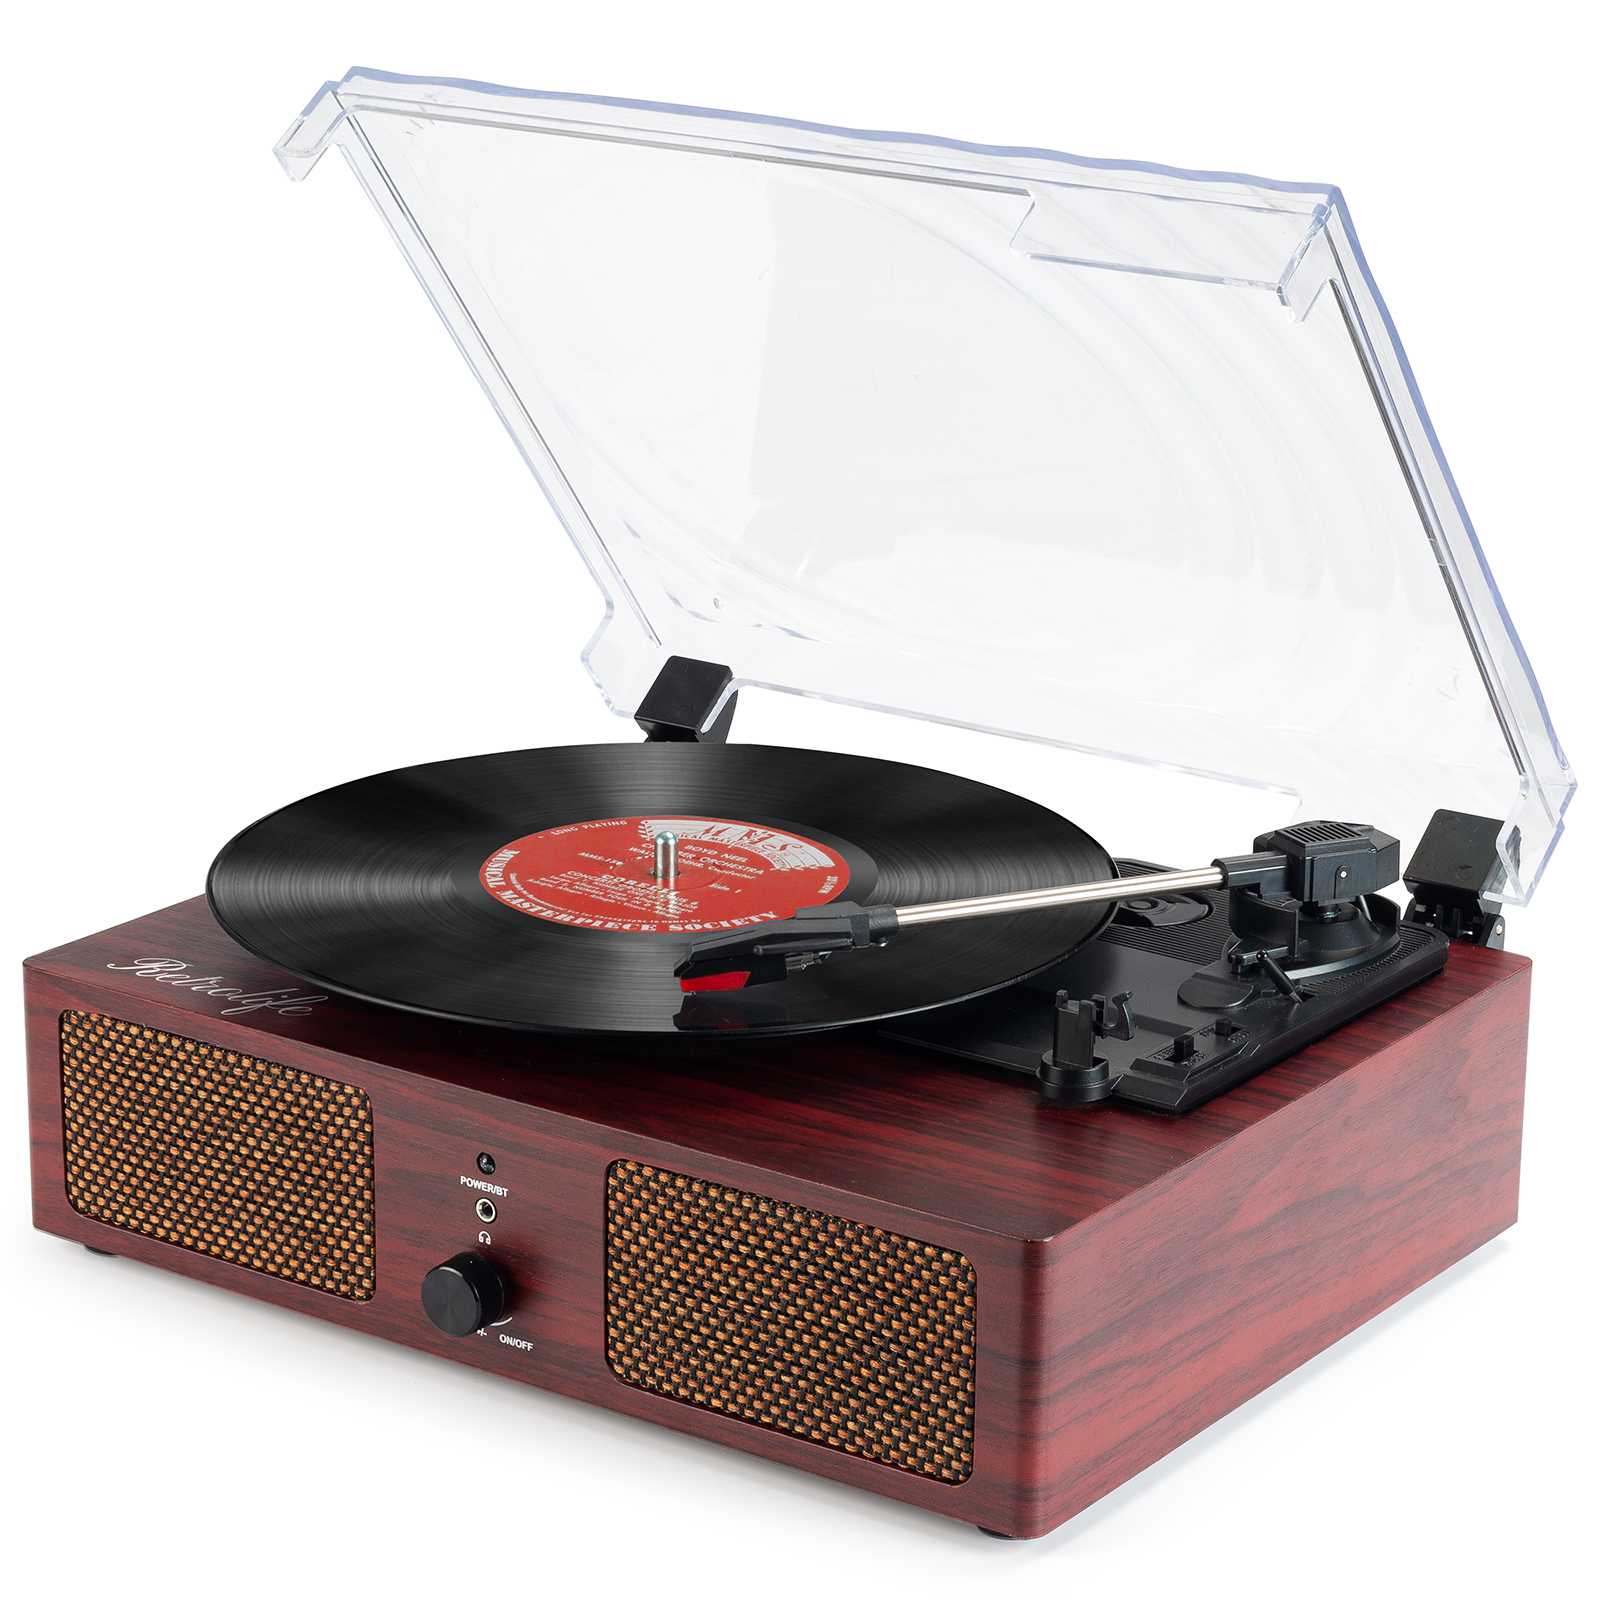 Record Player with radio in Vintage Wood Design 